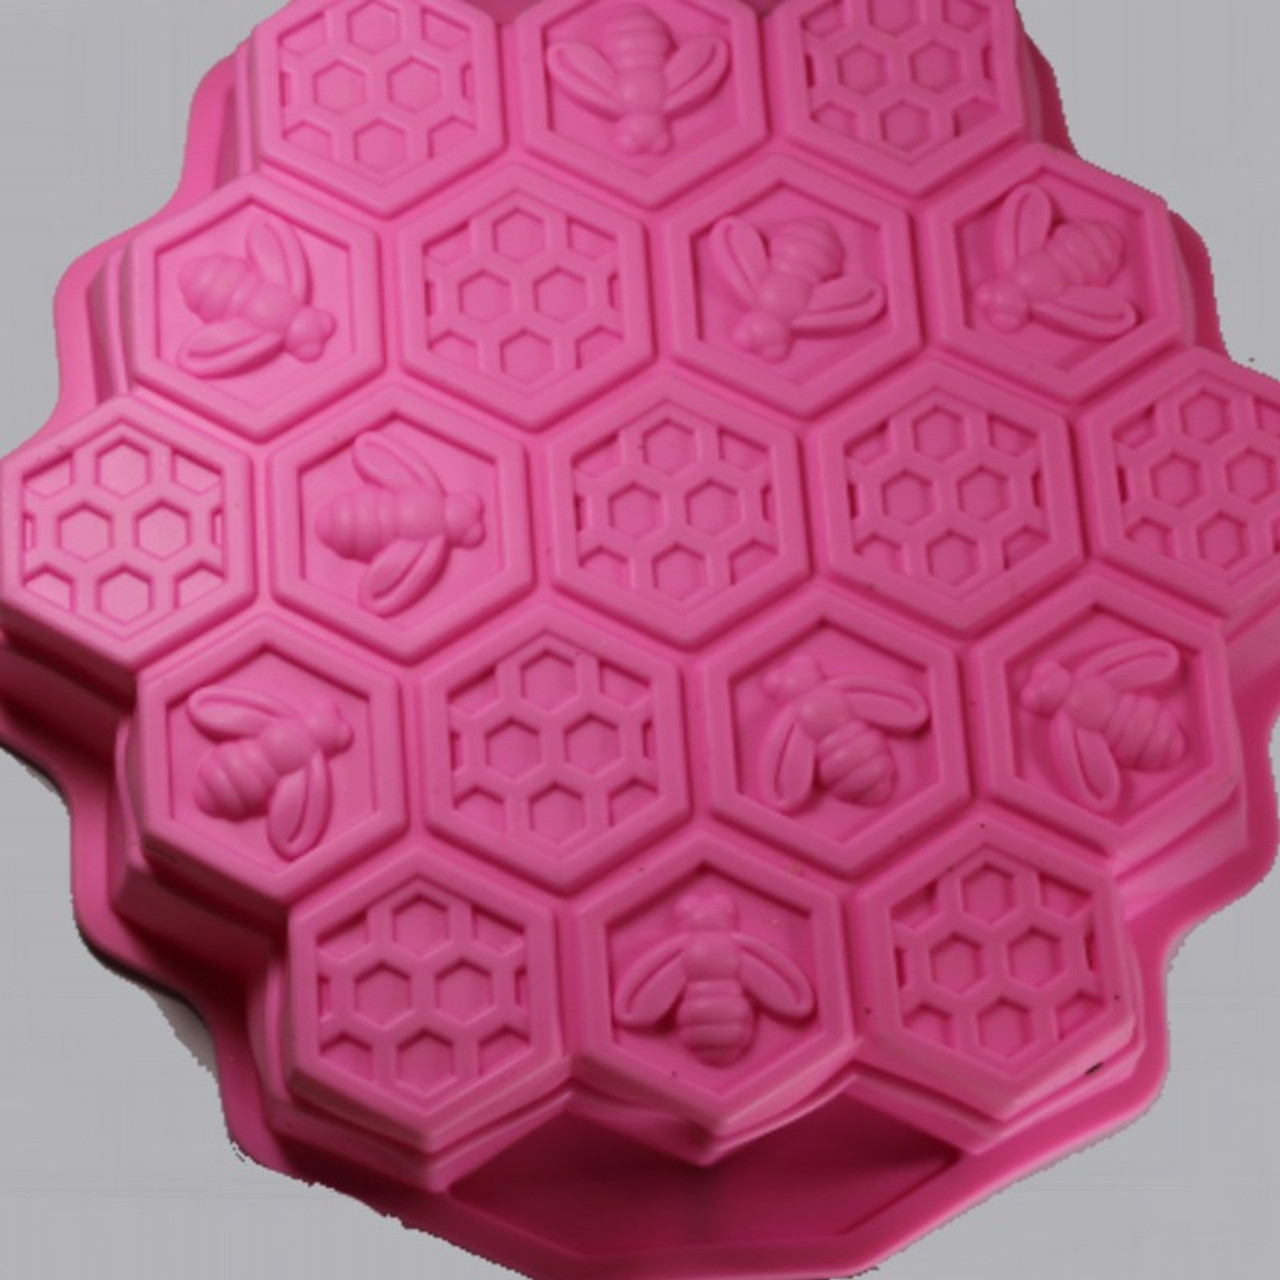 YUZBOU 19 Cells Bee Honeycomb Shaped 3D Soap Molds Silicone Bee Hive Moulds for Baking, As Shown